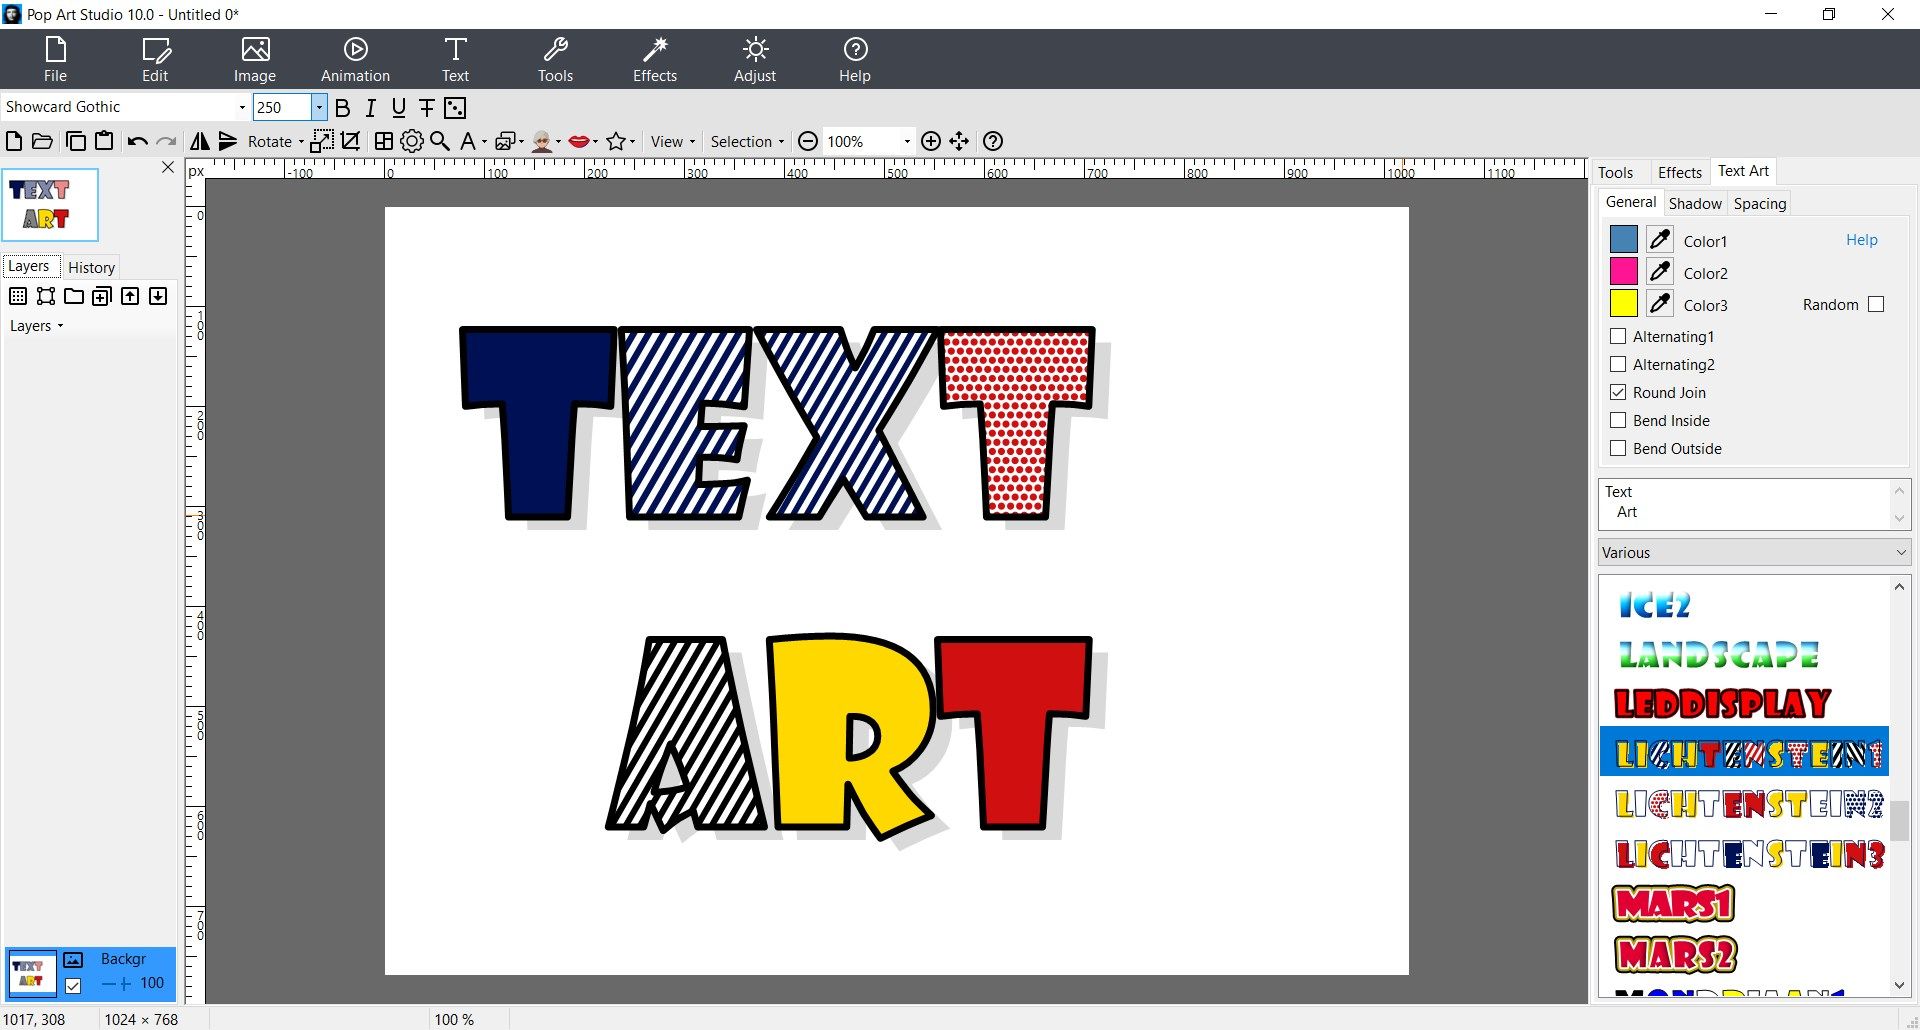 Pop Art Studio contains many text styles and effects. For example ABC blocks, Buttons, Newspaper and Magazine cutouts. Bronze, copper, silver, and gold effects. Retro, Pop Art, Seventies, and Cartoon.